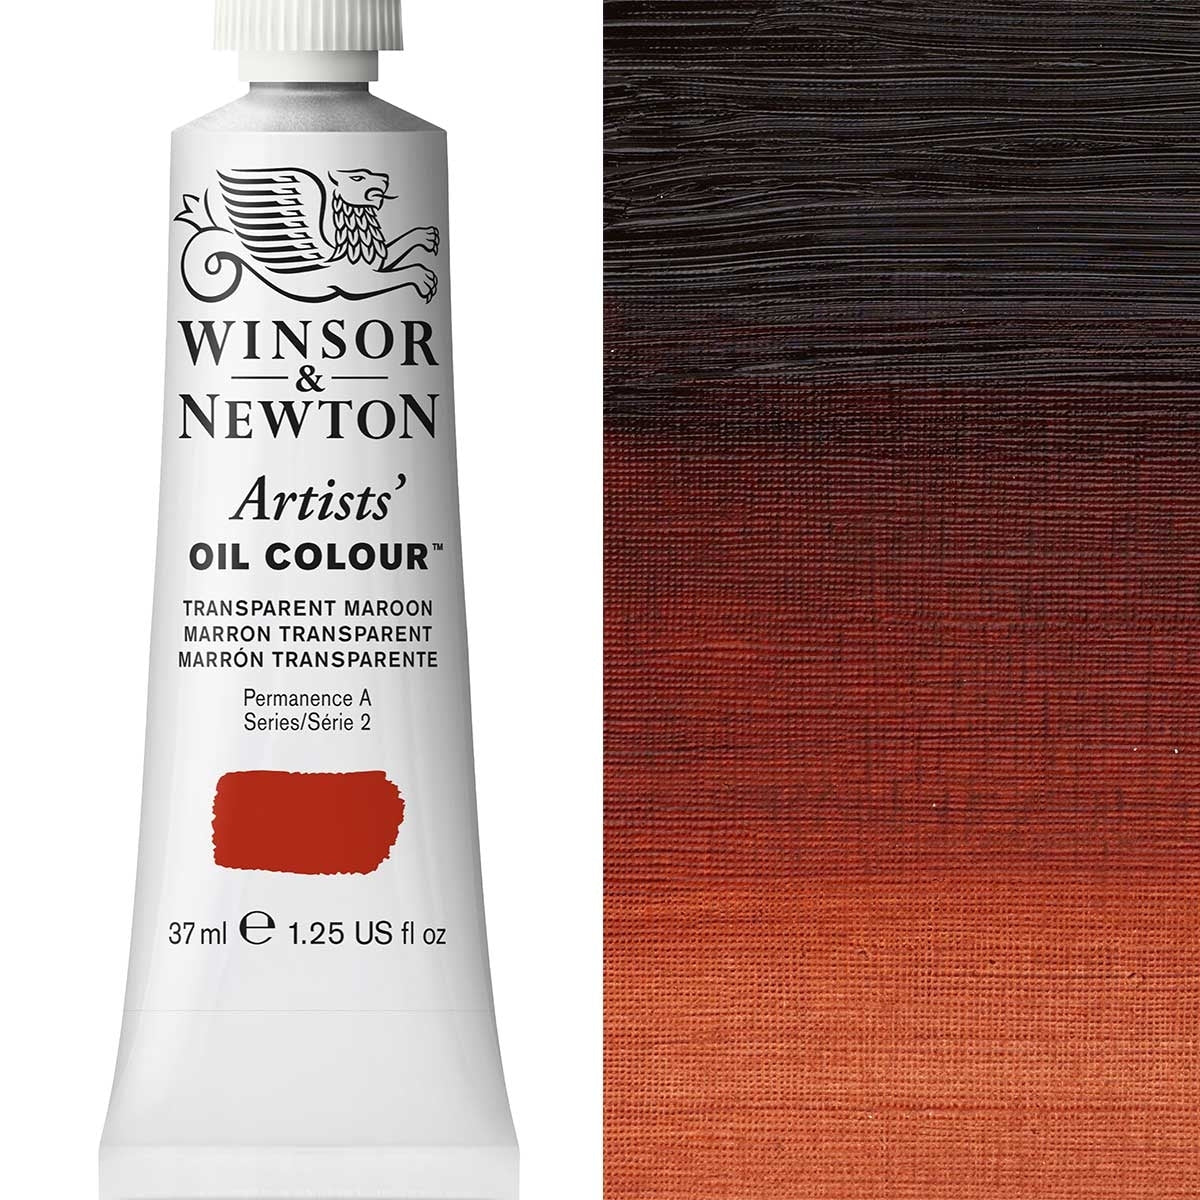 Winsor and Newton - Artists' Oil Colour - 37ml - Transparent Maroon